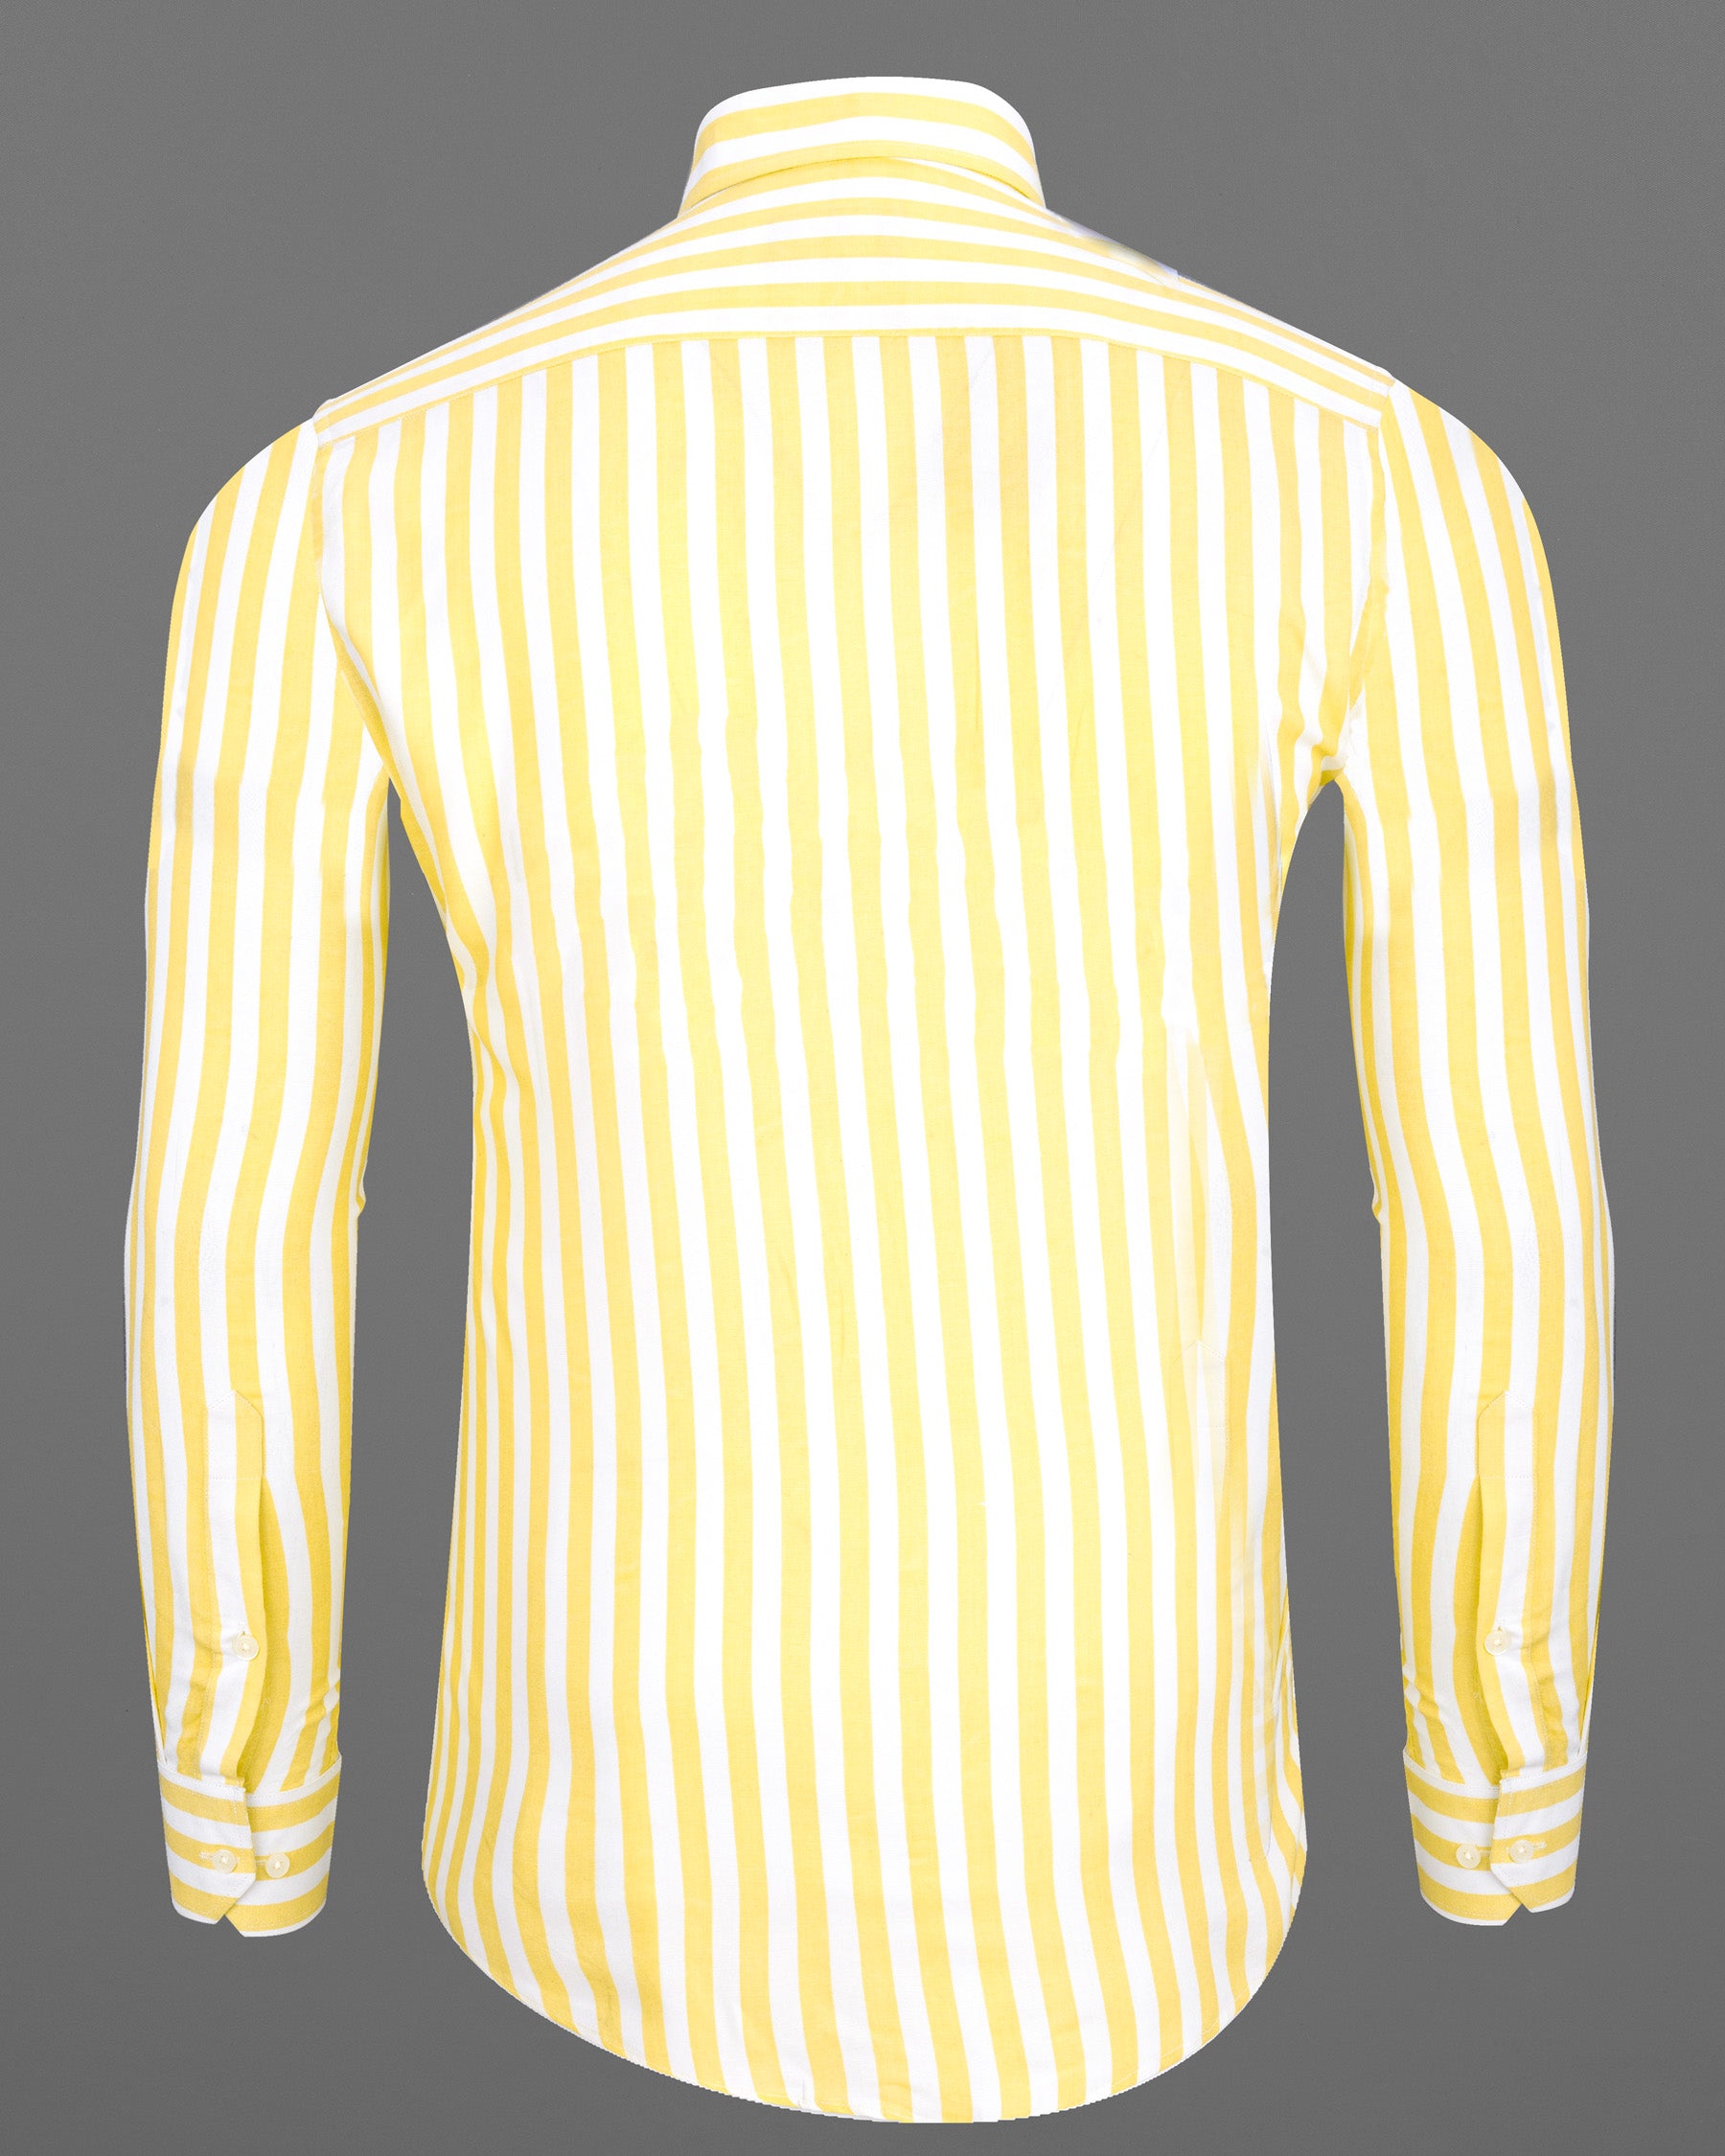 Colonial Yellow and Bright White Striped Premium Tencel Shirt